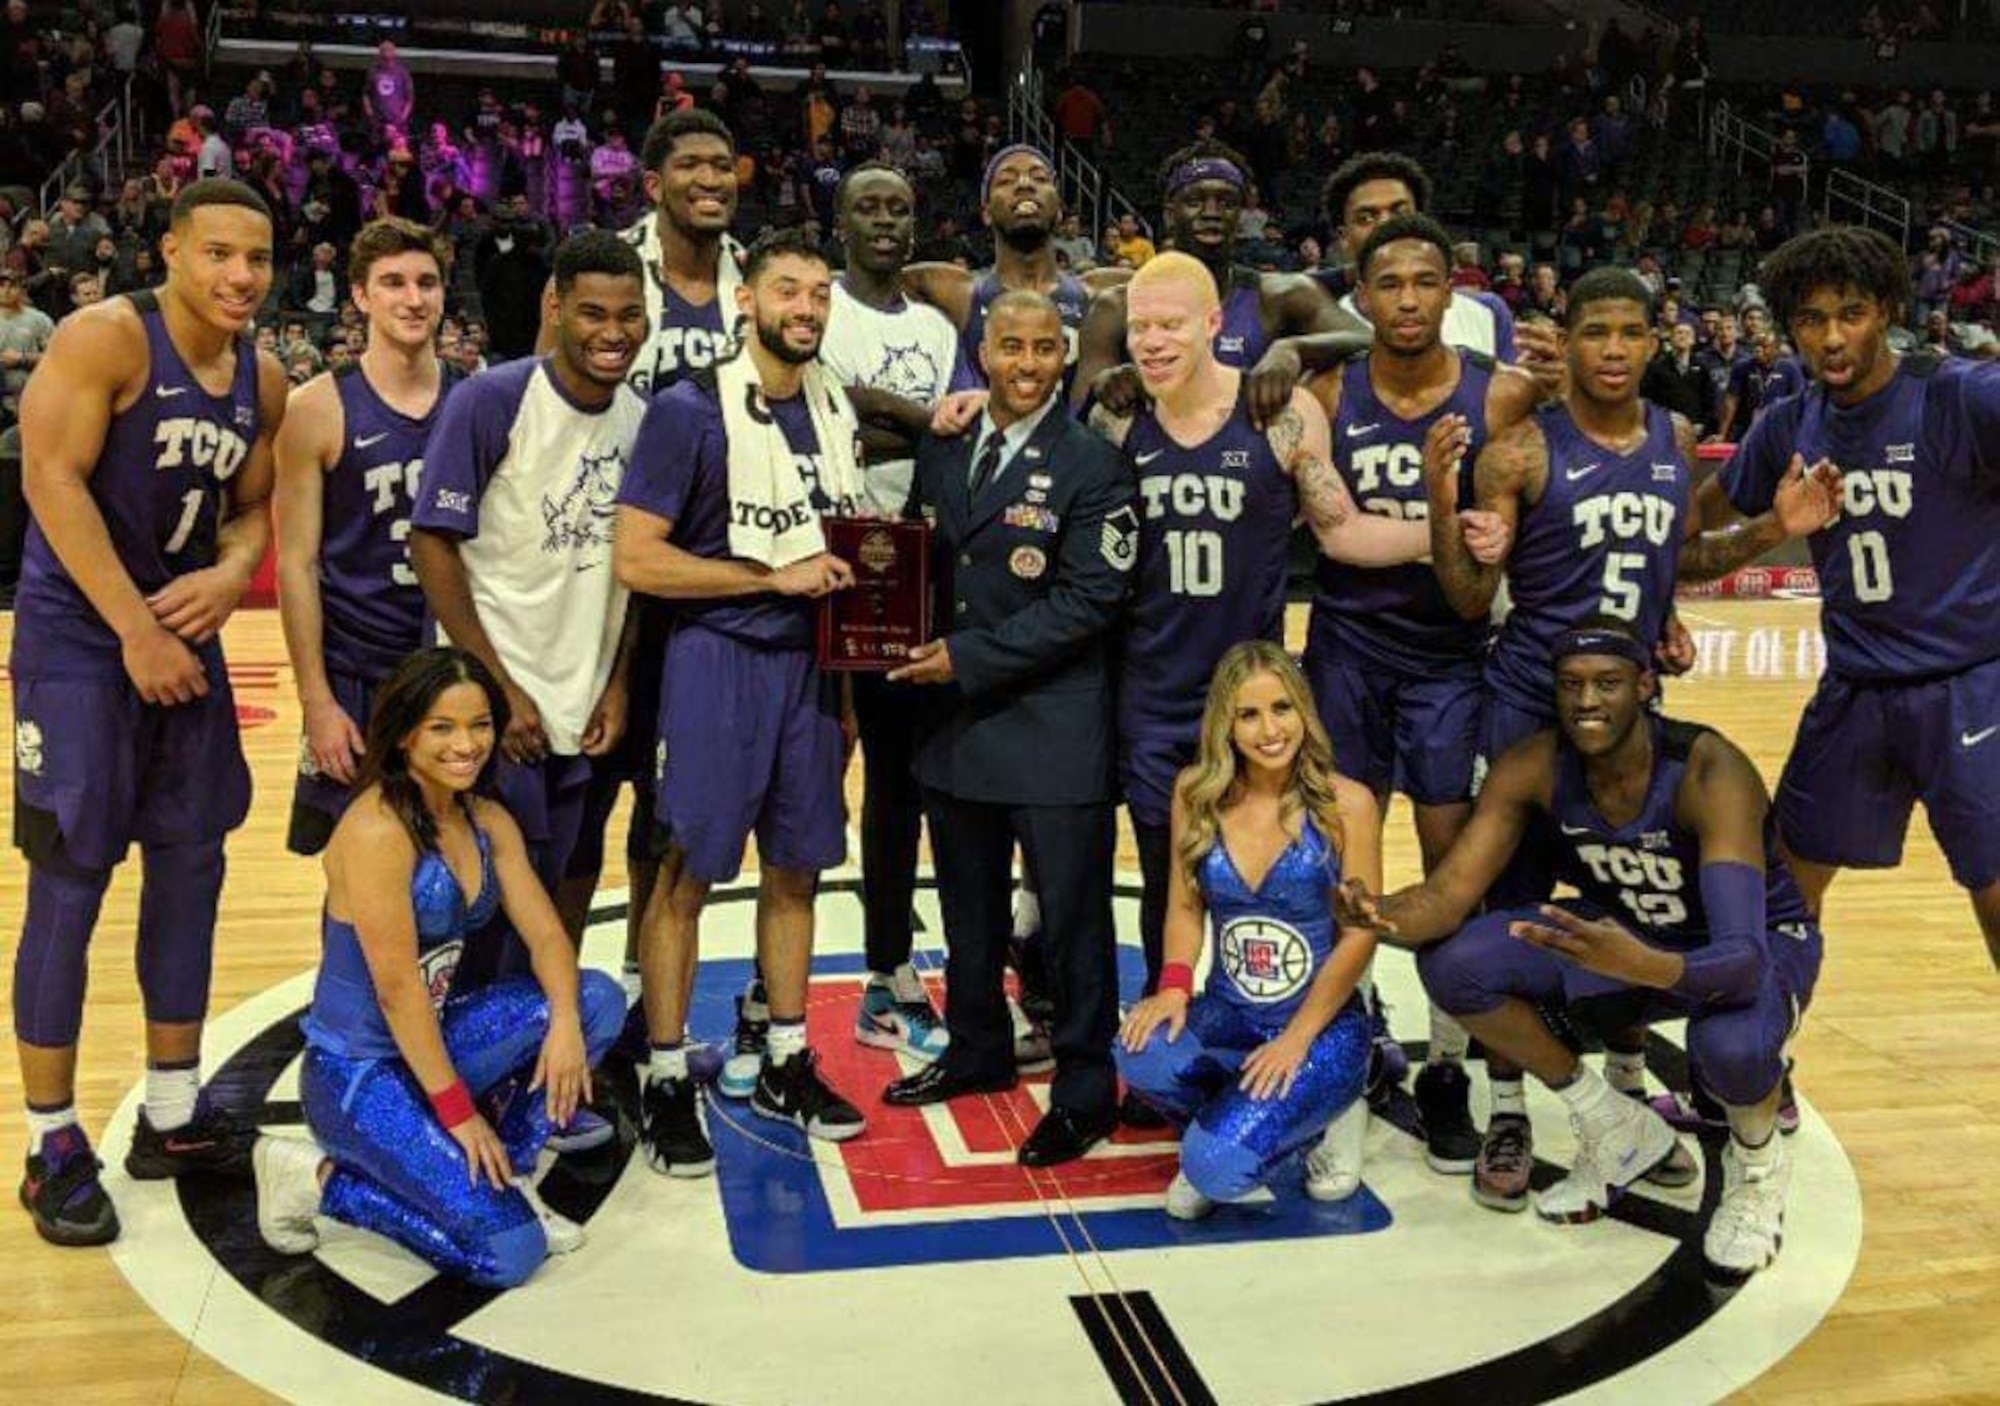 Master Sgt. Marcus Heard, a recruiter at March Air Reserve Base, poses with the championship winning TCU Horn Frogs basketball team, after they took home the Air Force Reserve Naismtih Hall of Fame Basketaball Hall of Fame Classic title in Los Angeles. Recruiters were asked to help present the MVP and championship trophies at all of the tournament AFRC sponsored. (Courtesy photo)